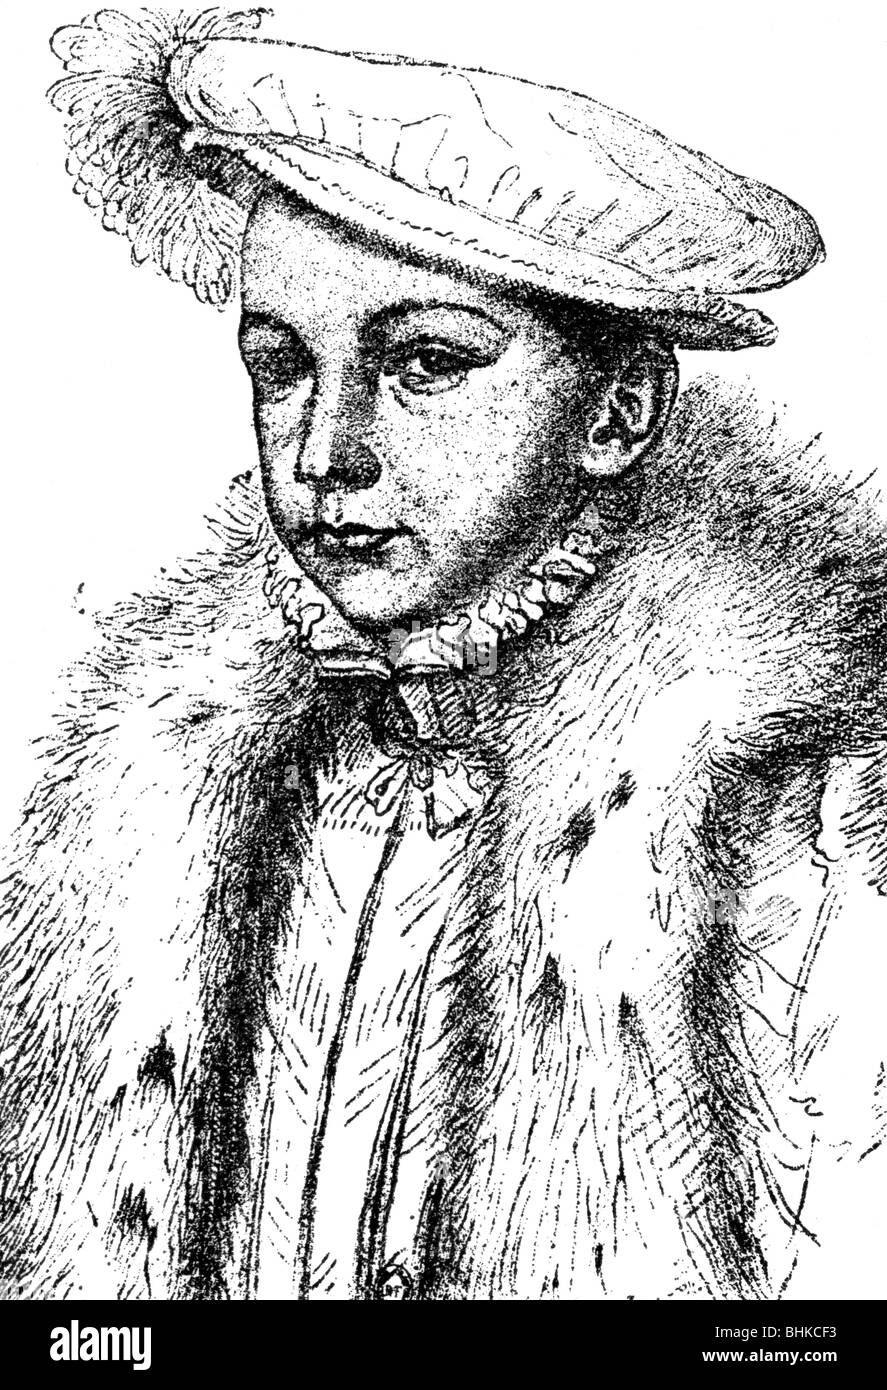 Francis II, 19.1.1544 - 5.12.1560, King of France 10.7.1559 - 5.12.1560, portrait, wood engraving, 19th century, , Stock Photo